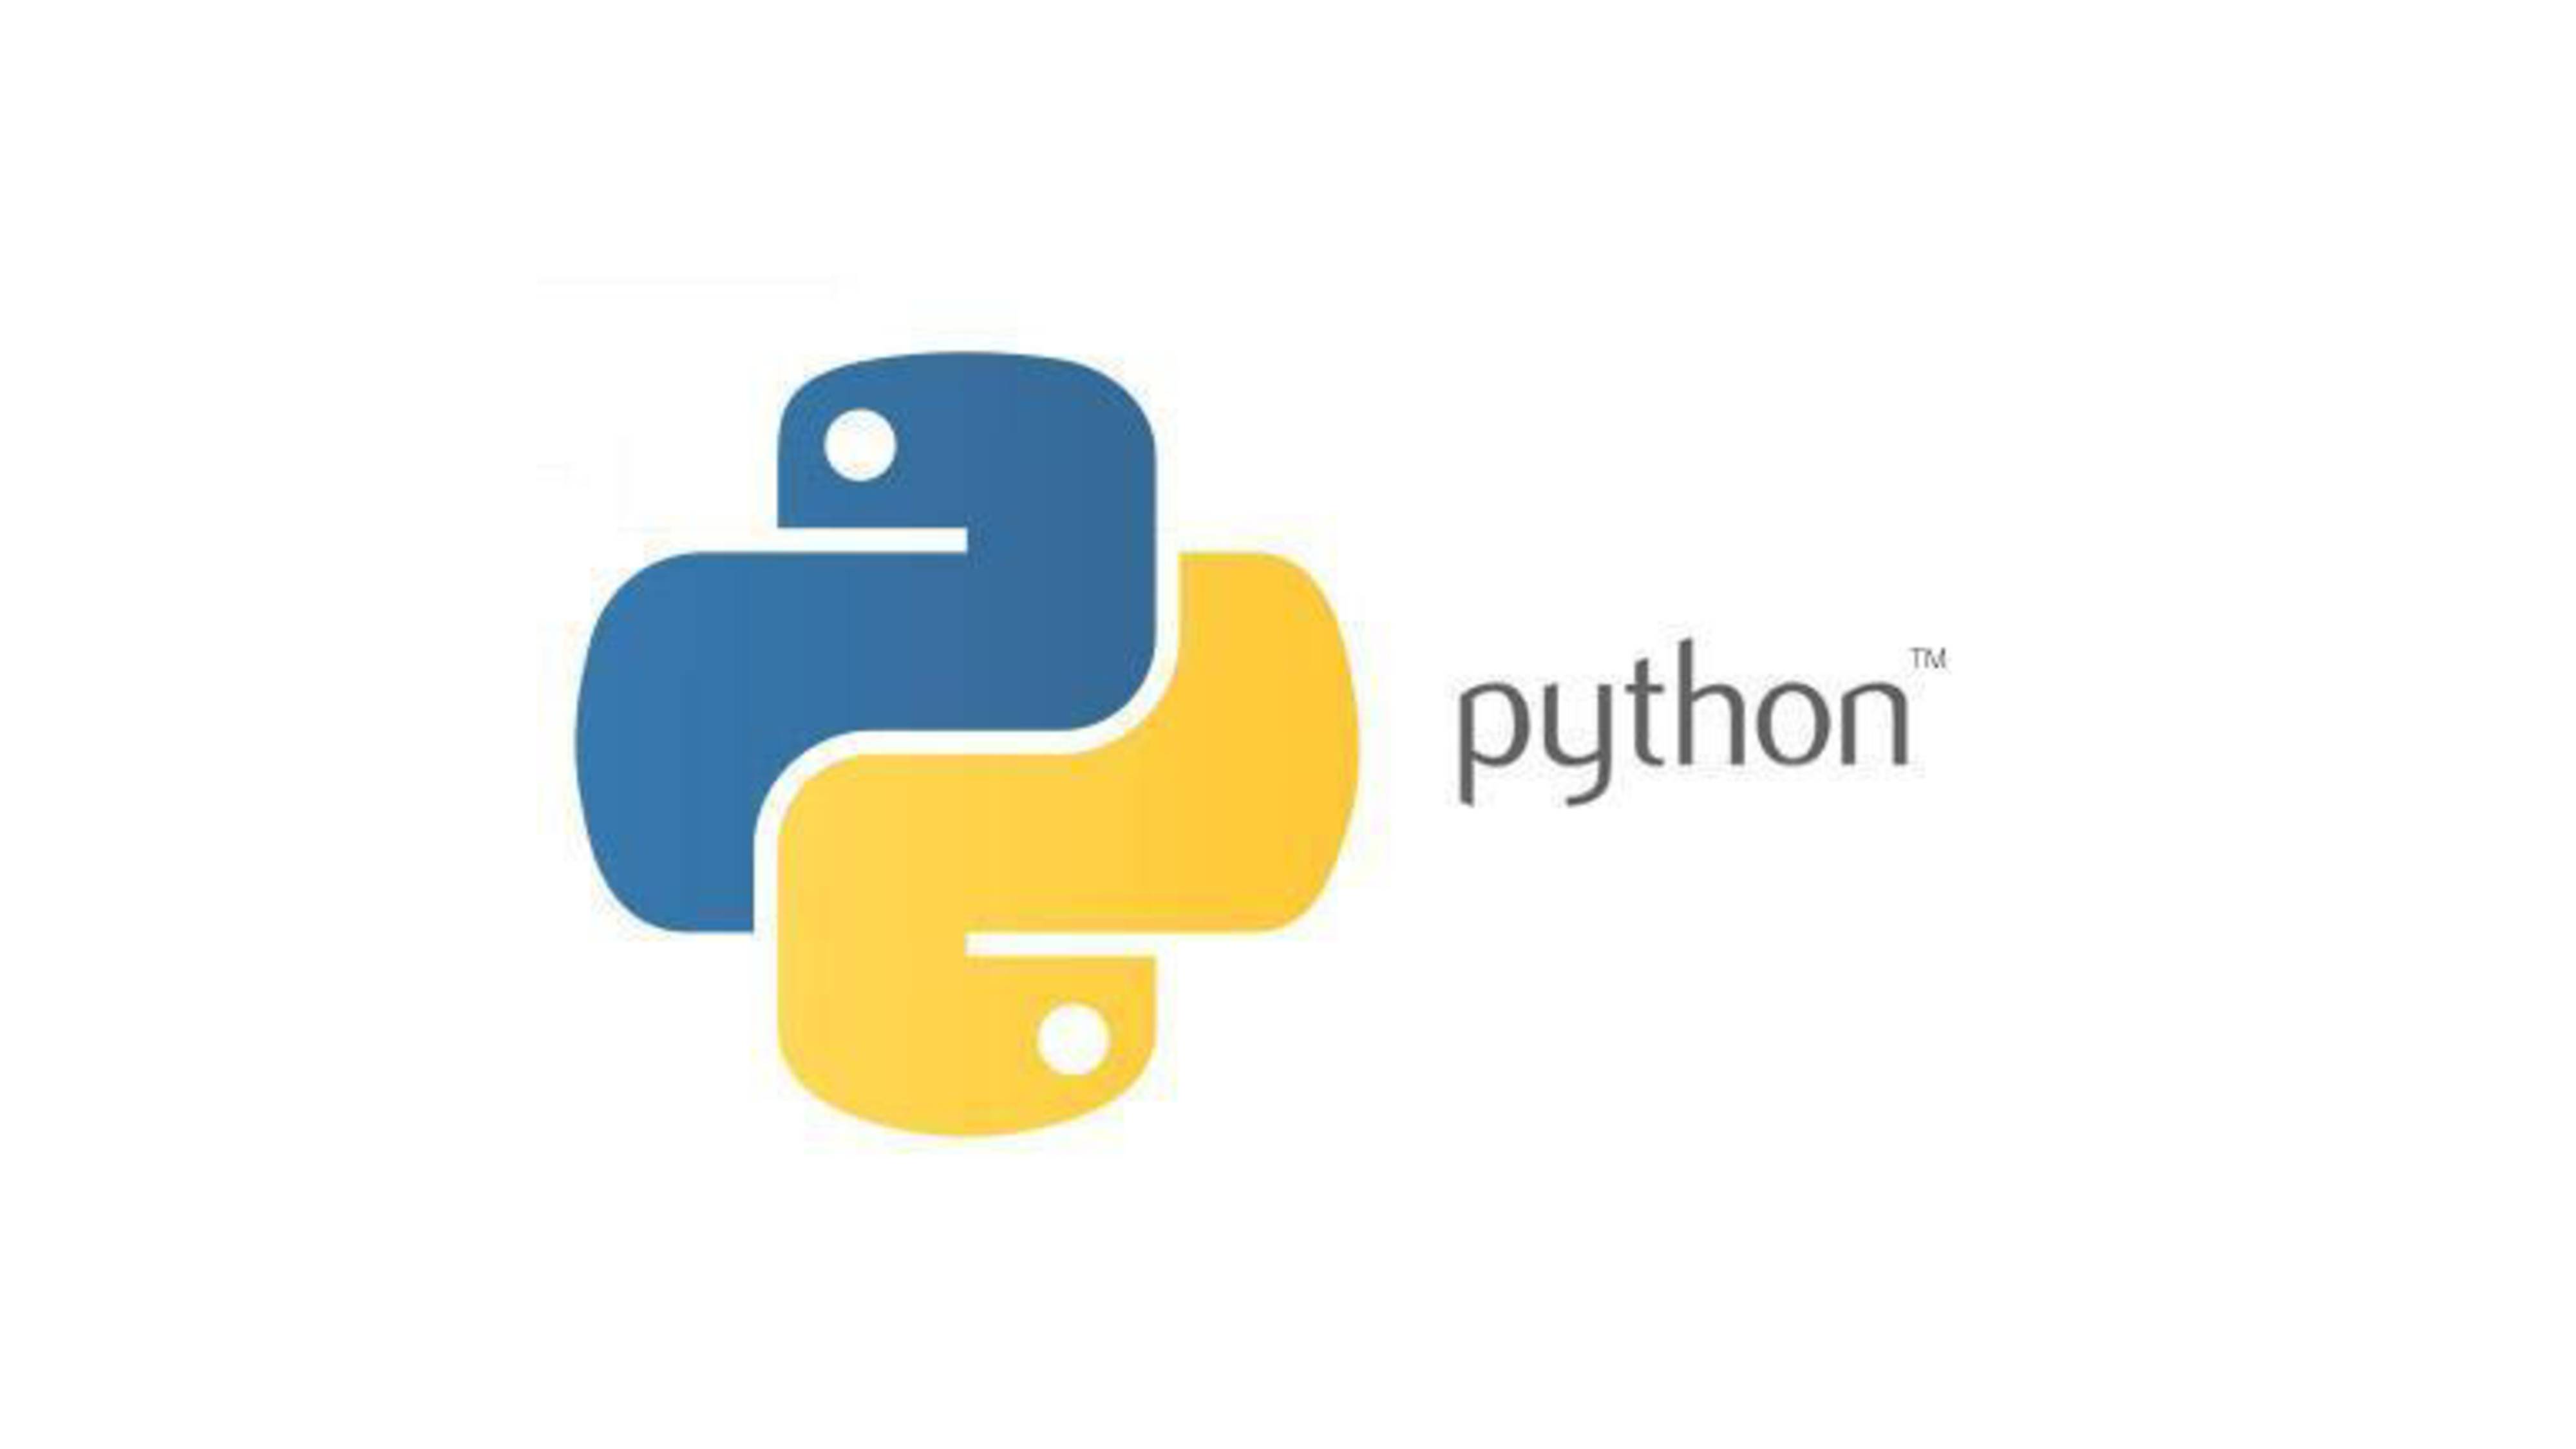 About Python